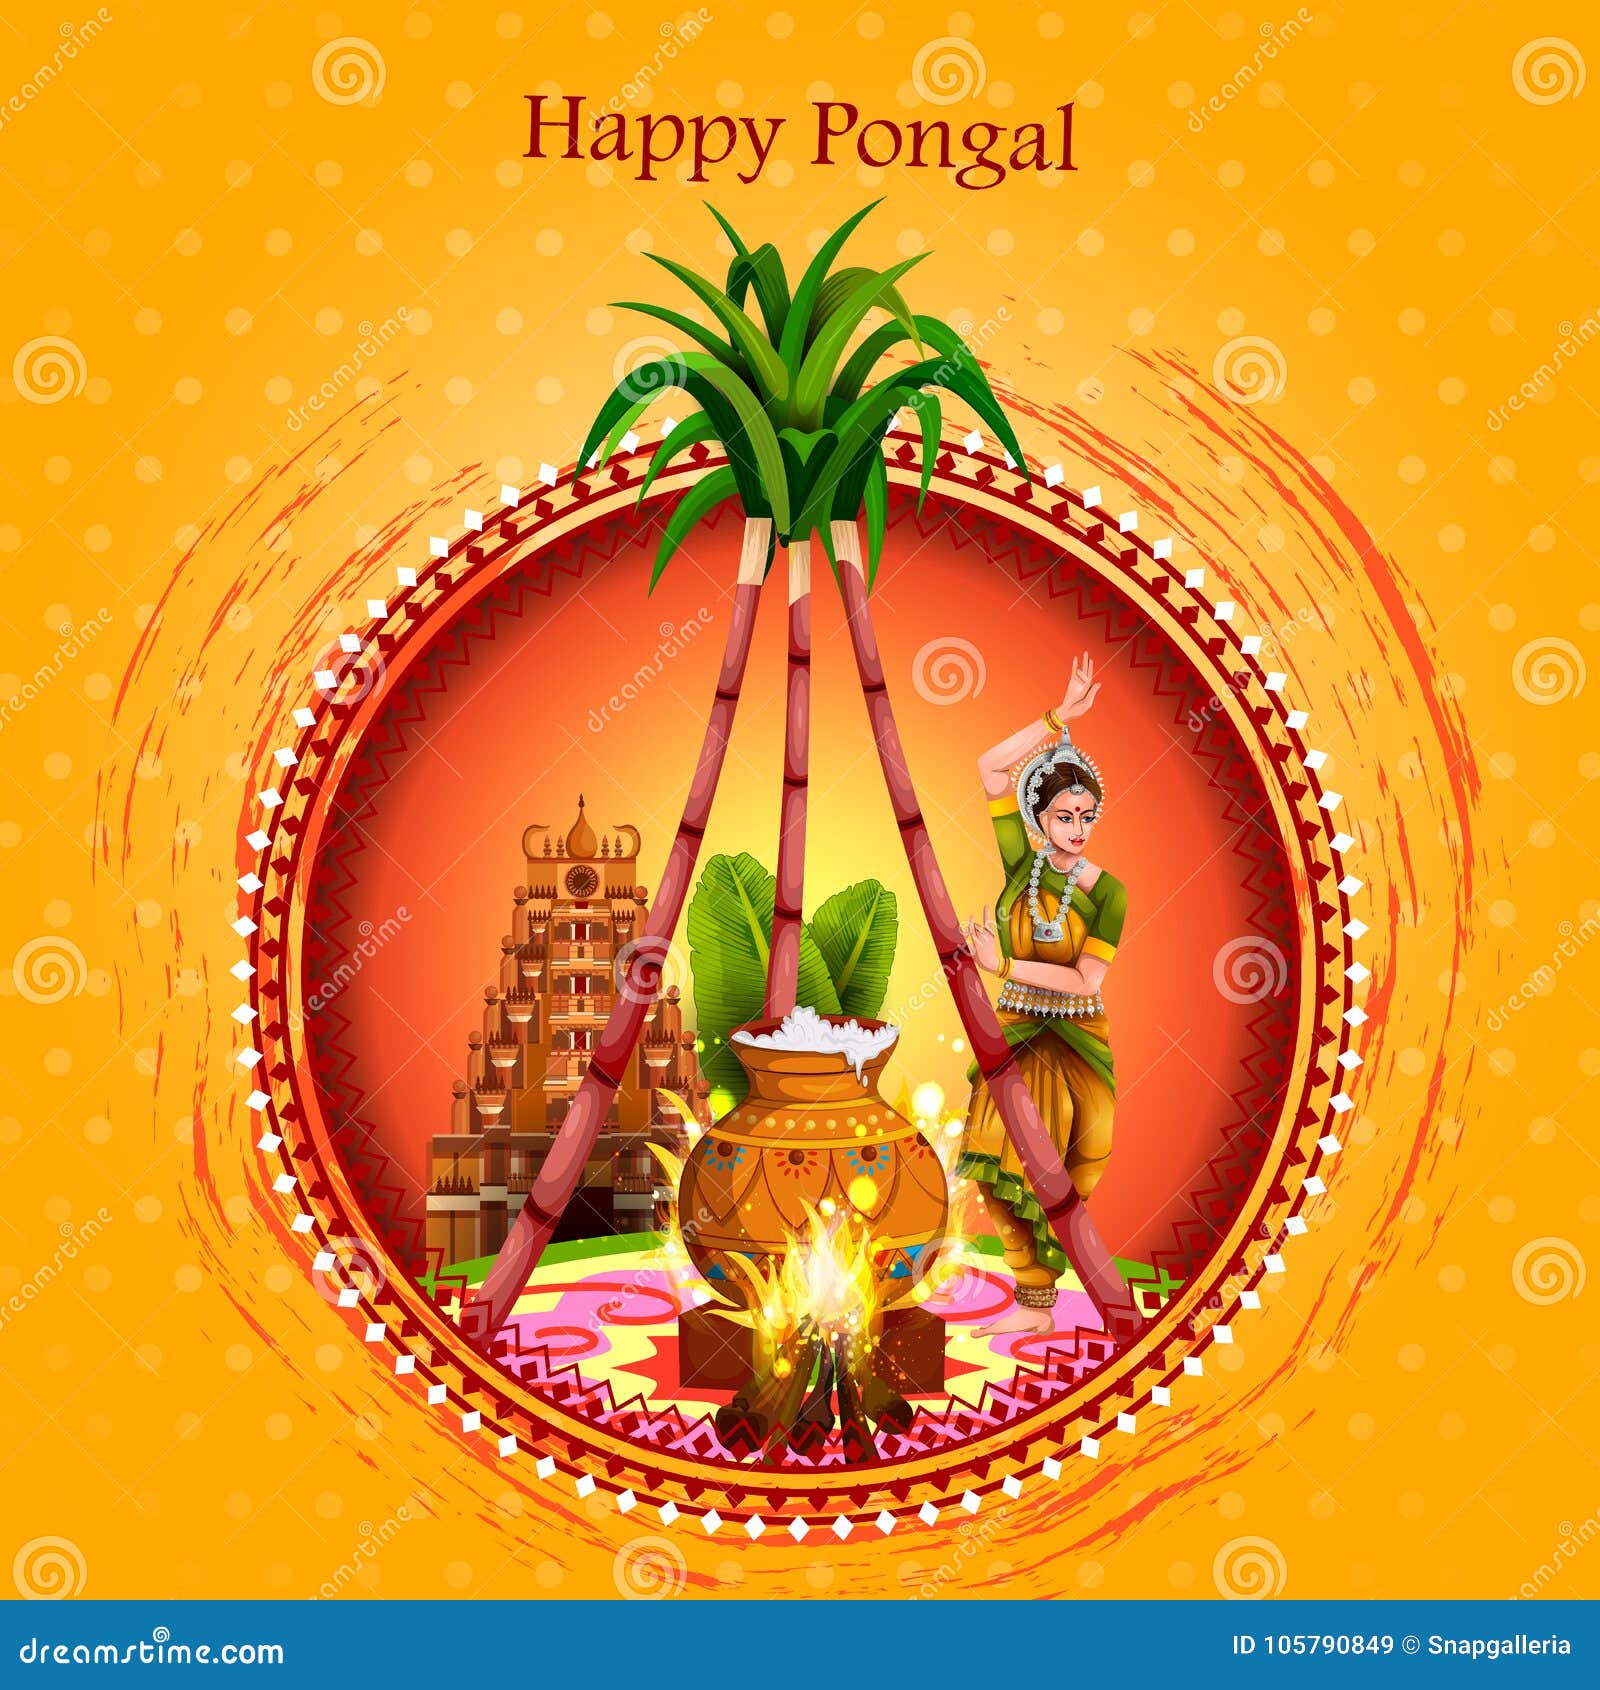 Happy Pongal Festival of Tamil Nadu India Background Stock Vector ...